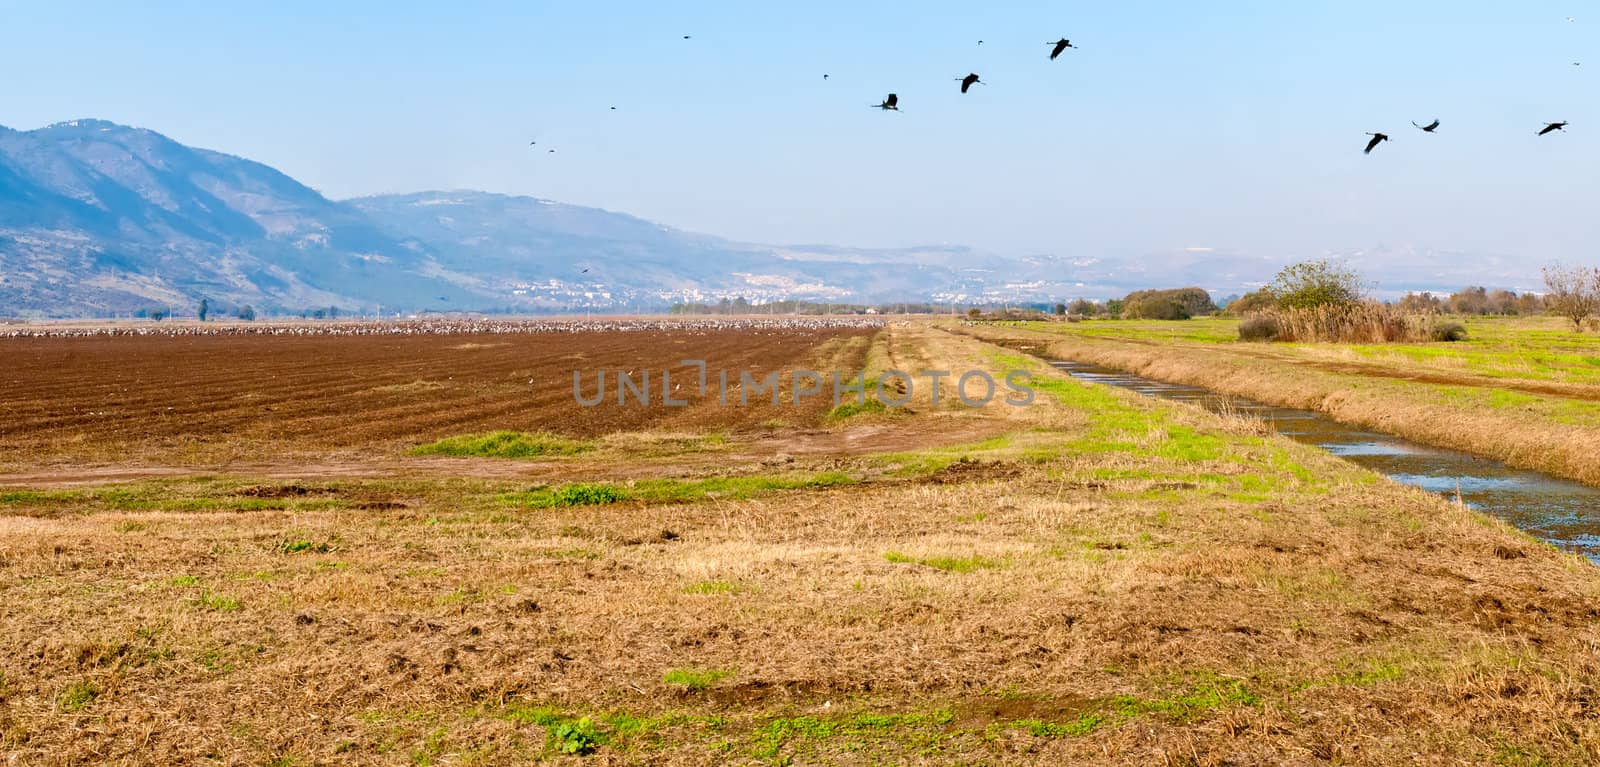 Landscape of the Upper Galilee.  Israel. by LarisaP